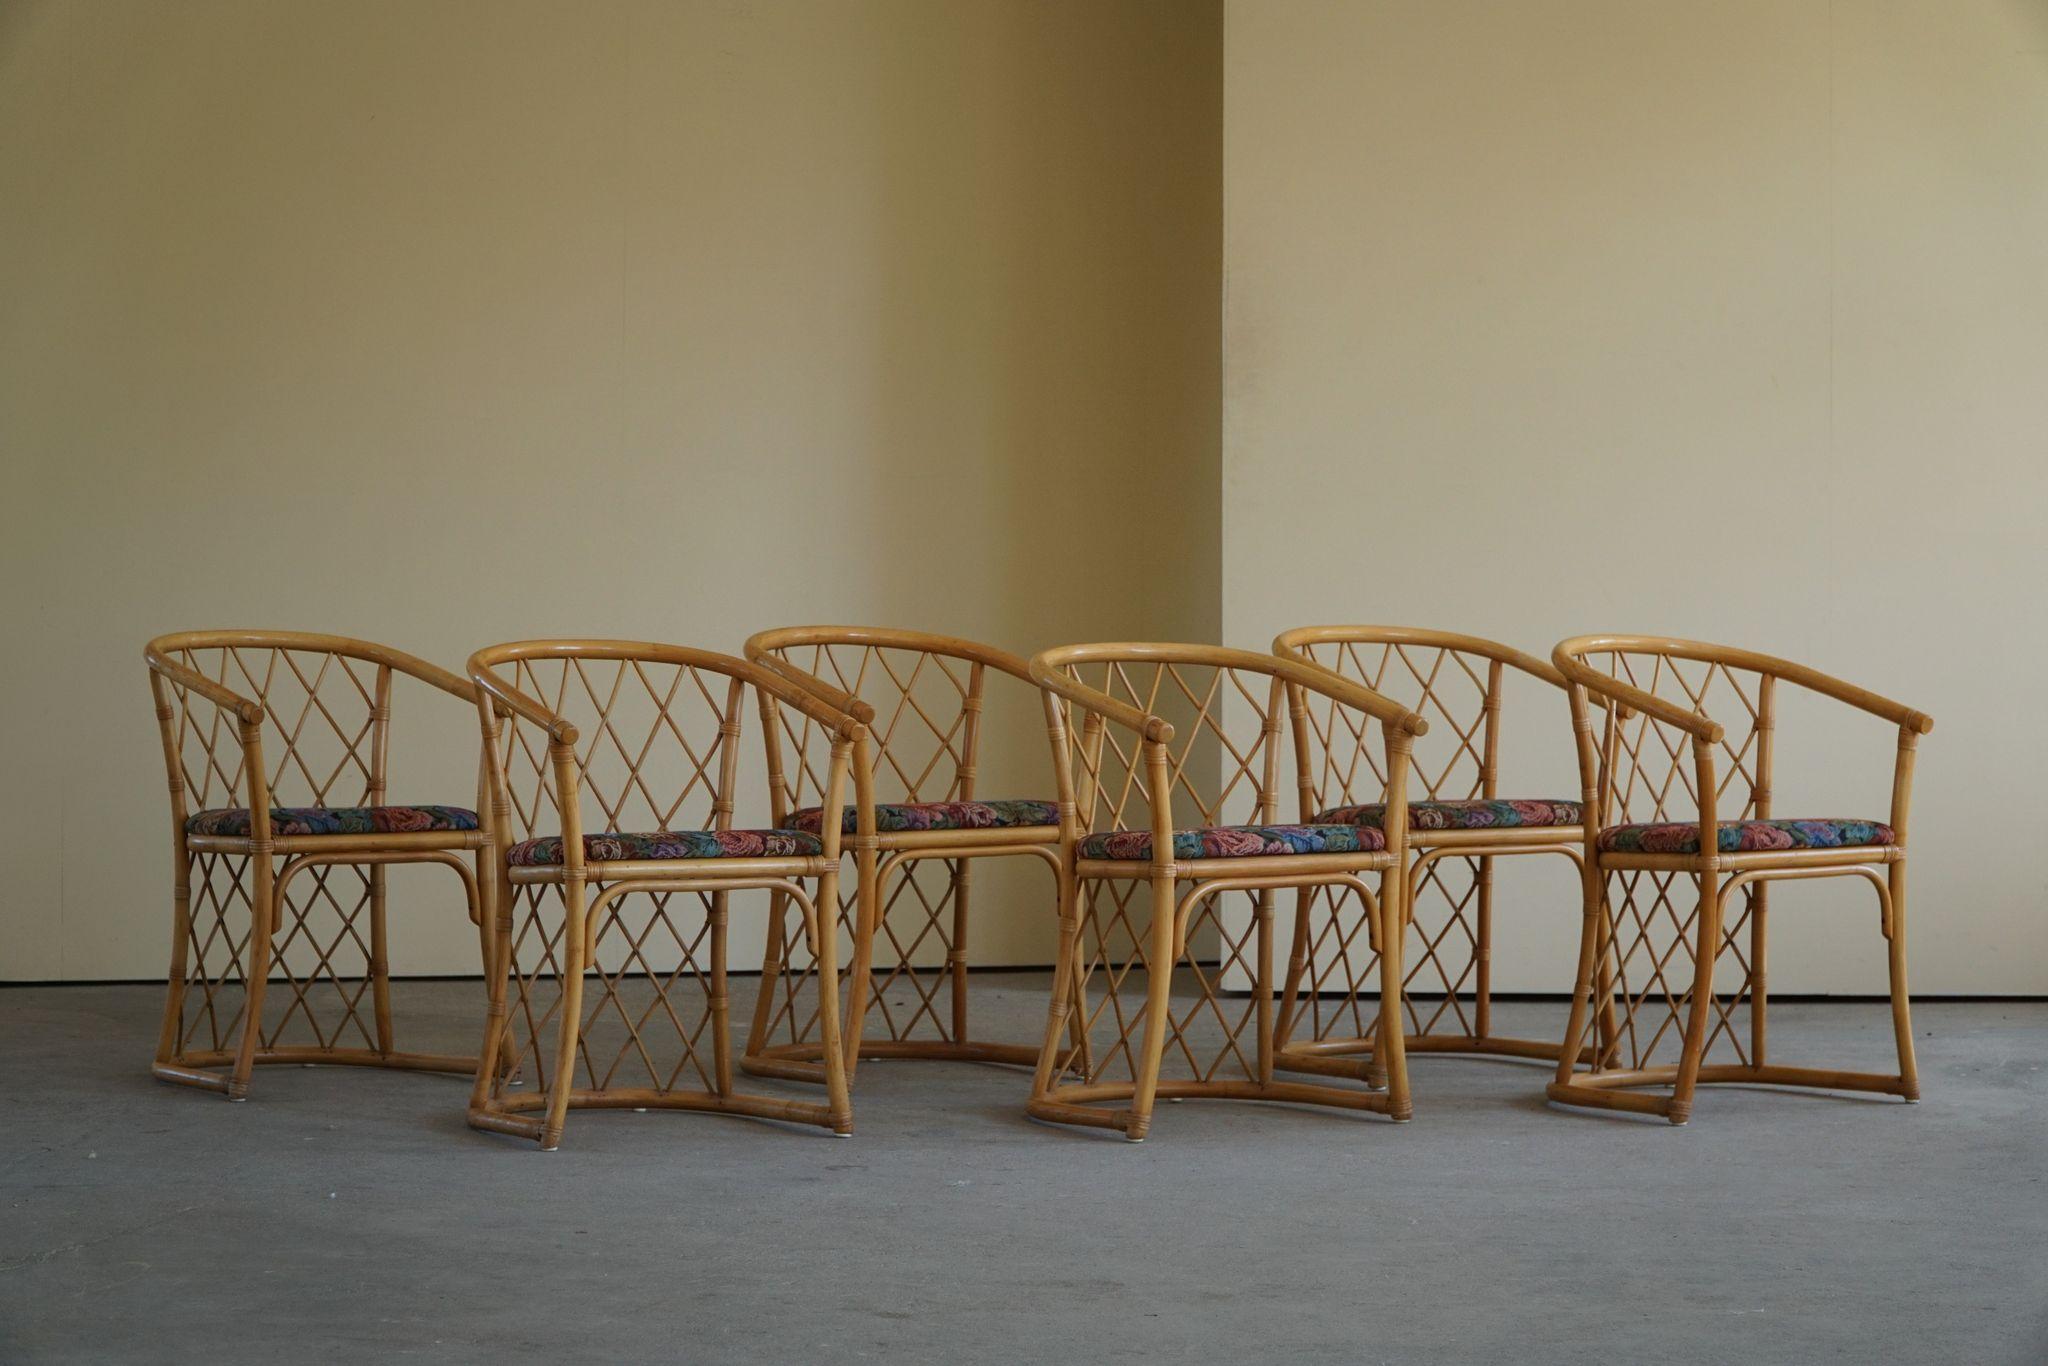 Set of 6 Sculptural Vintage Bamboo Dining Chairs, Danish Modern, Made in 1960s In Good Condition For Sale In Odense, DK